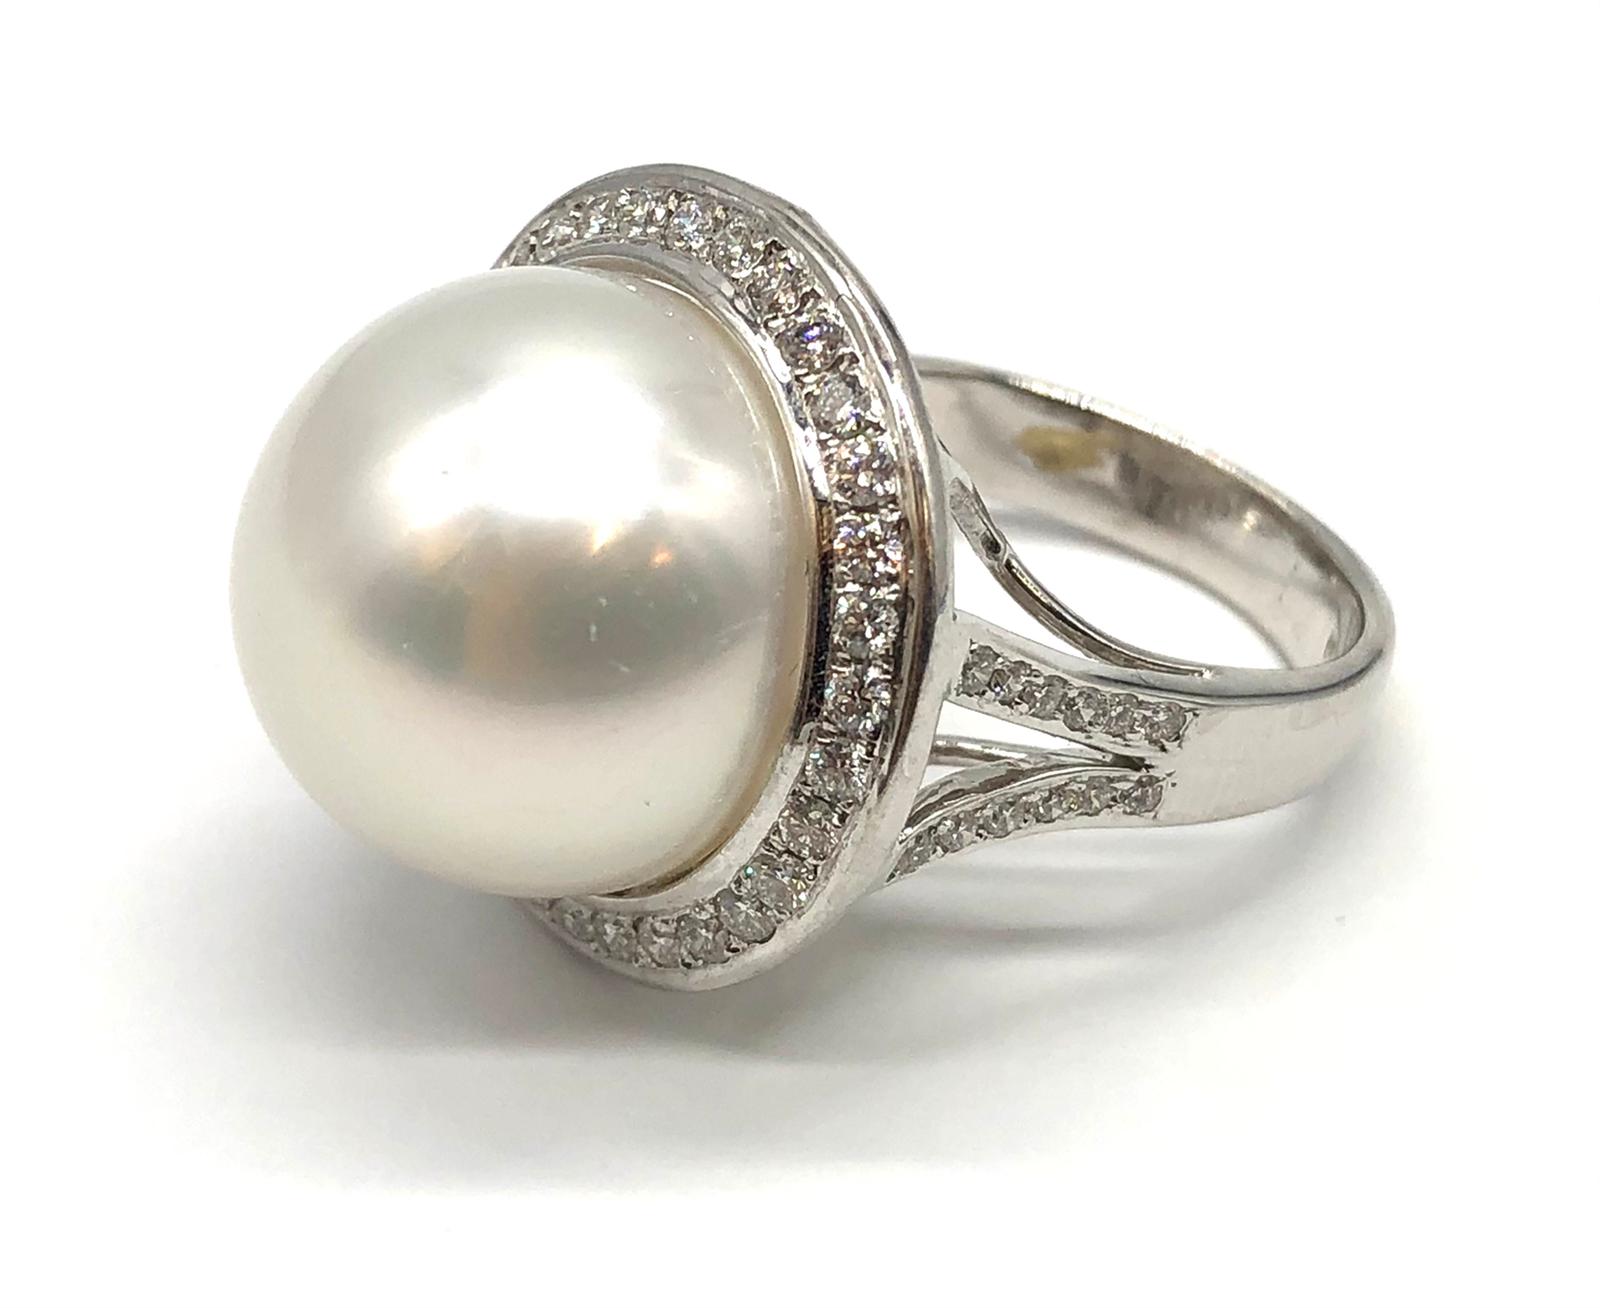 A large Kimoto pearl (17mm diameter) ring set in diamond and 18ct white gold ring, weight 14.43g and